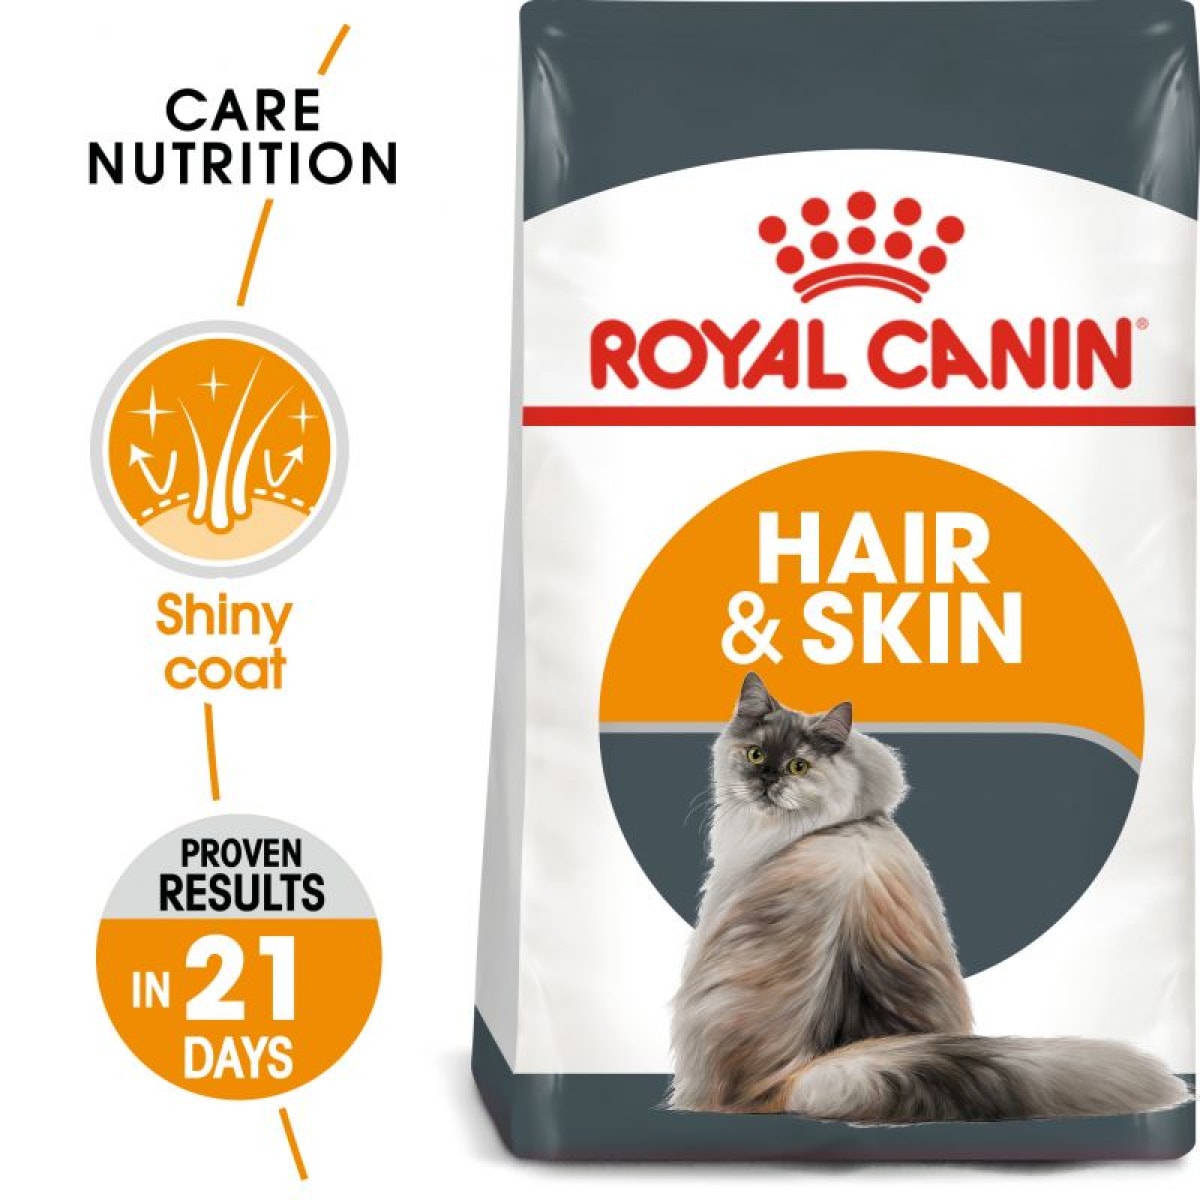 Royal Canin – Hair & Skin 400g – Pawfect Supplies Ltd Product Image